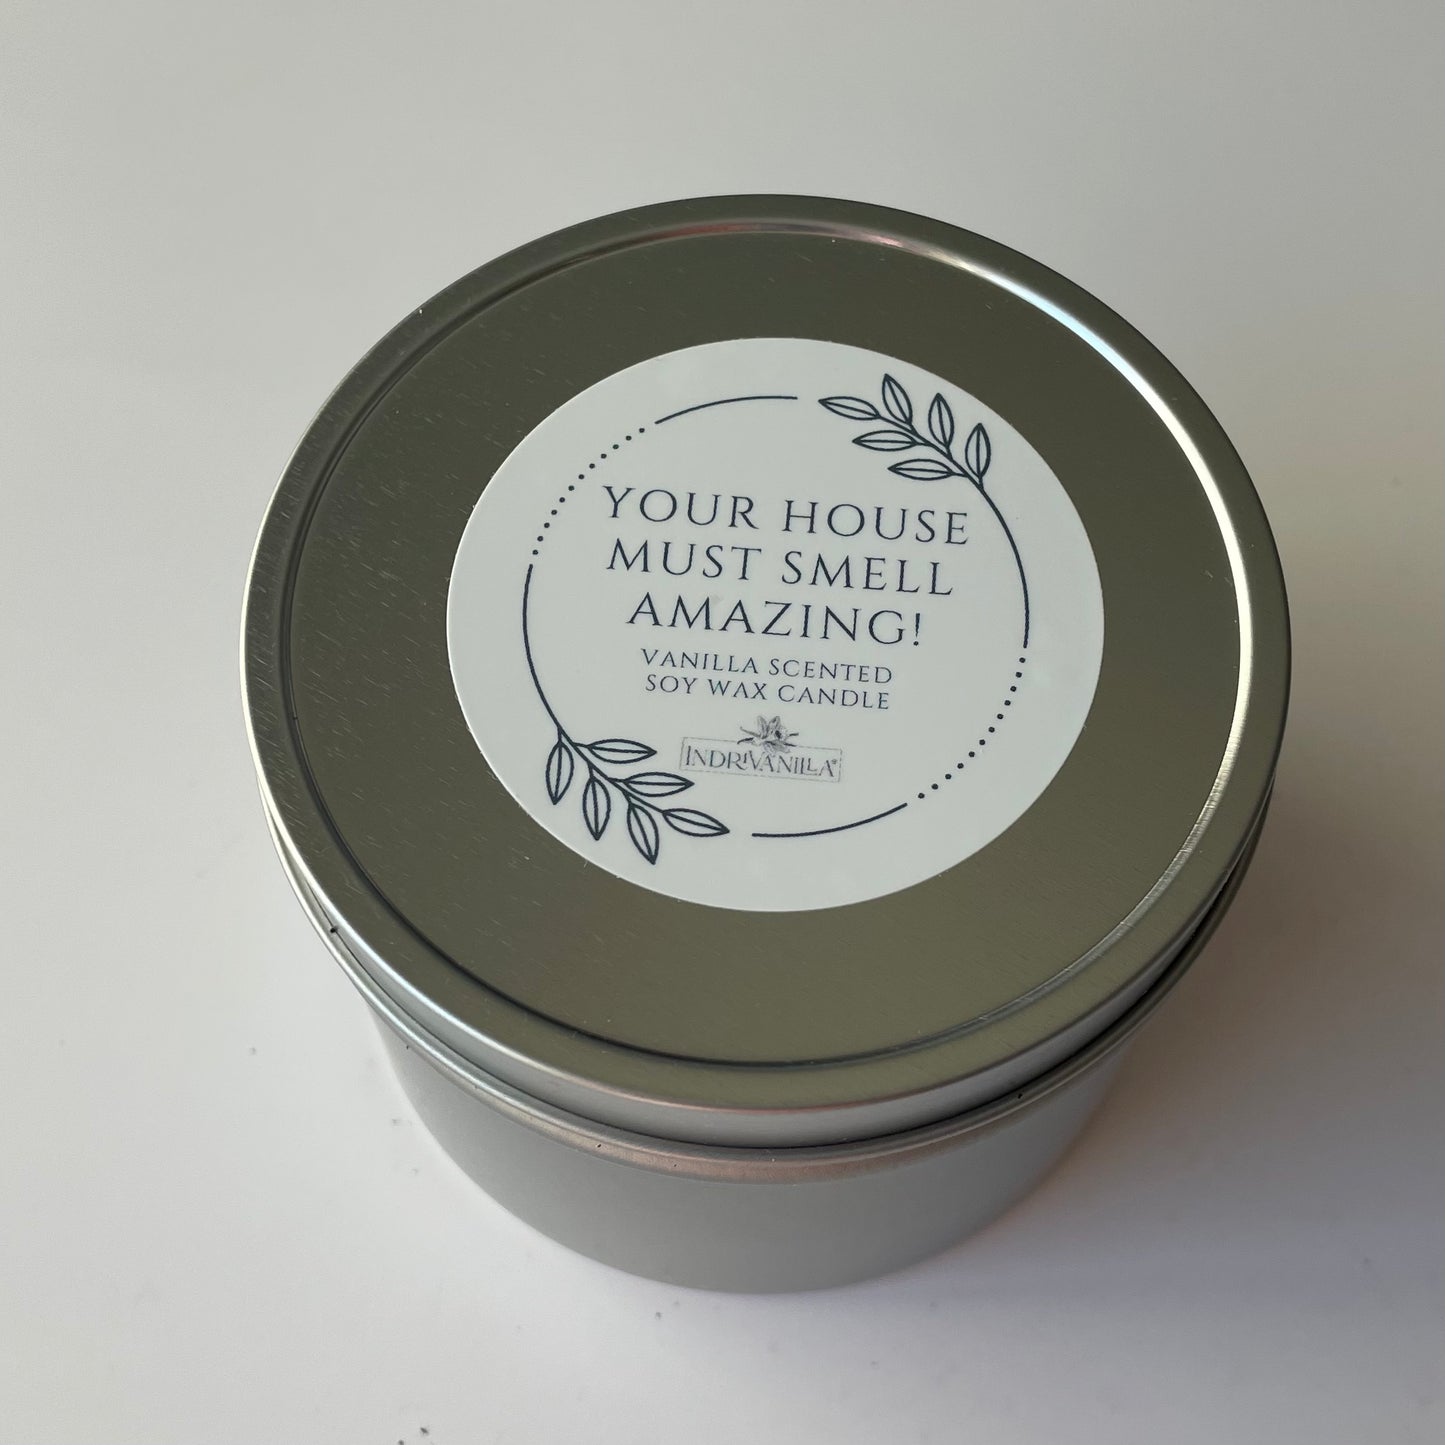 Vanilla Candle "Your House Must Smell Amazing"